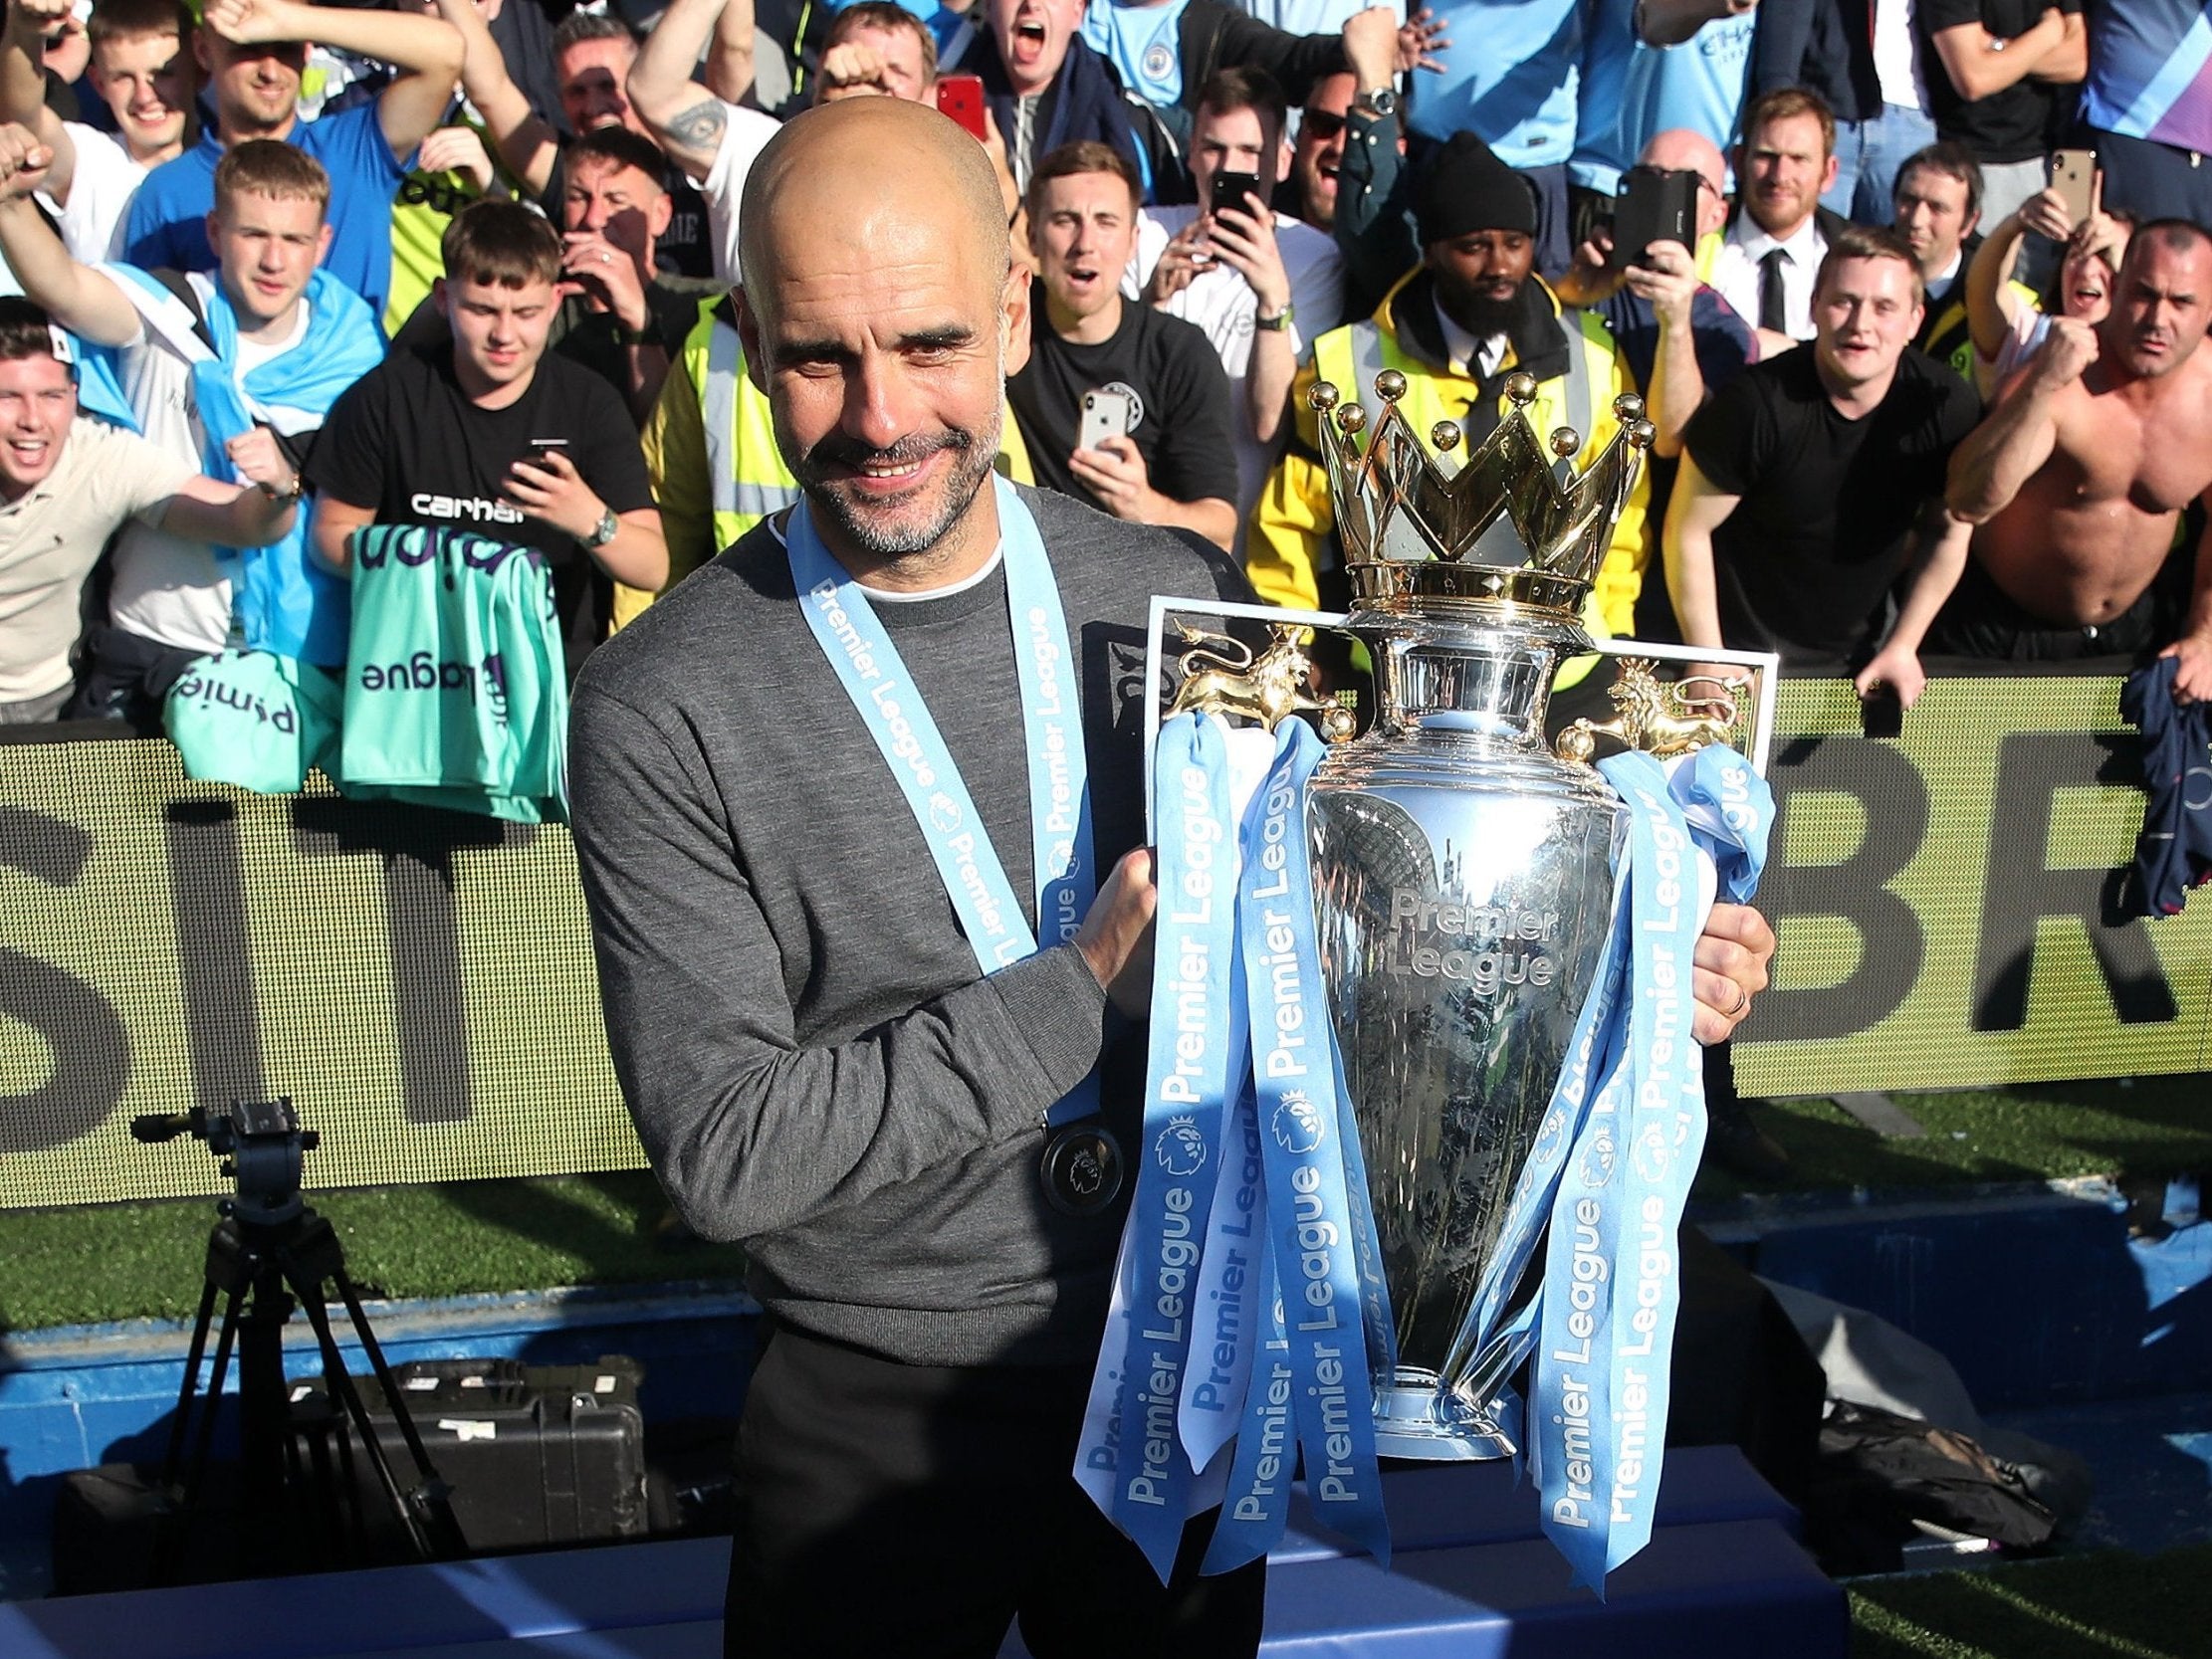 Guardiola celebrated Manchester City winning the Premier League title on Sunday